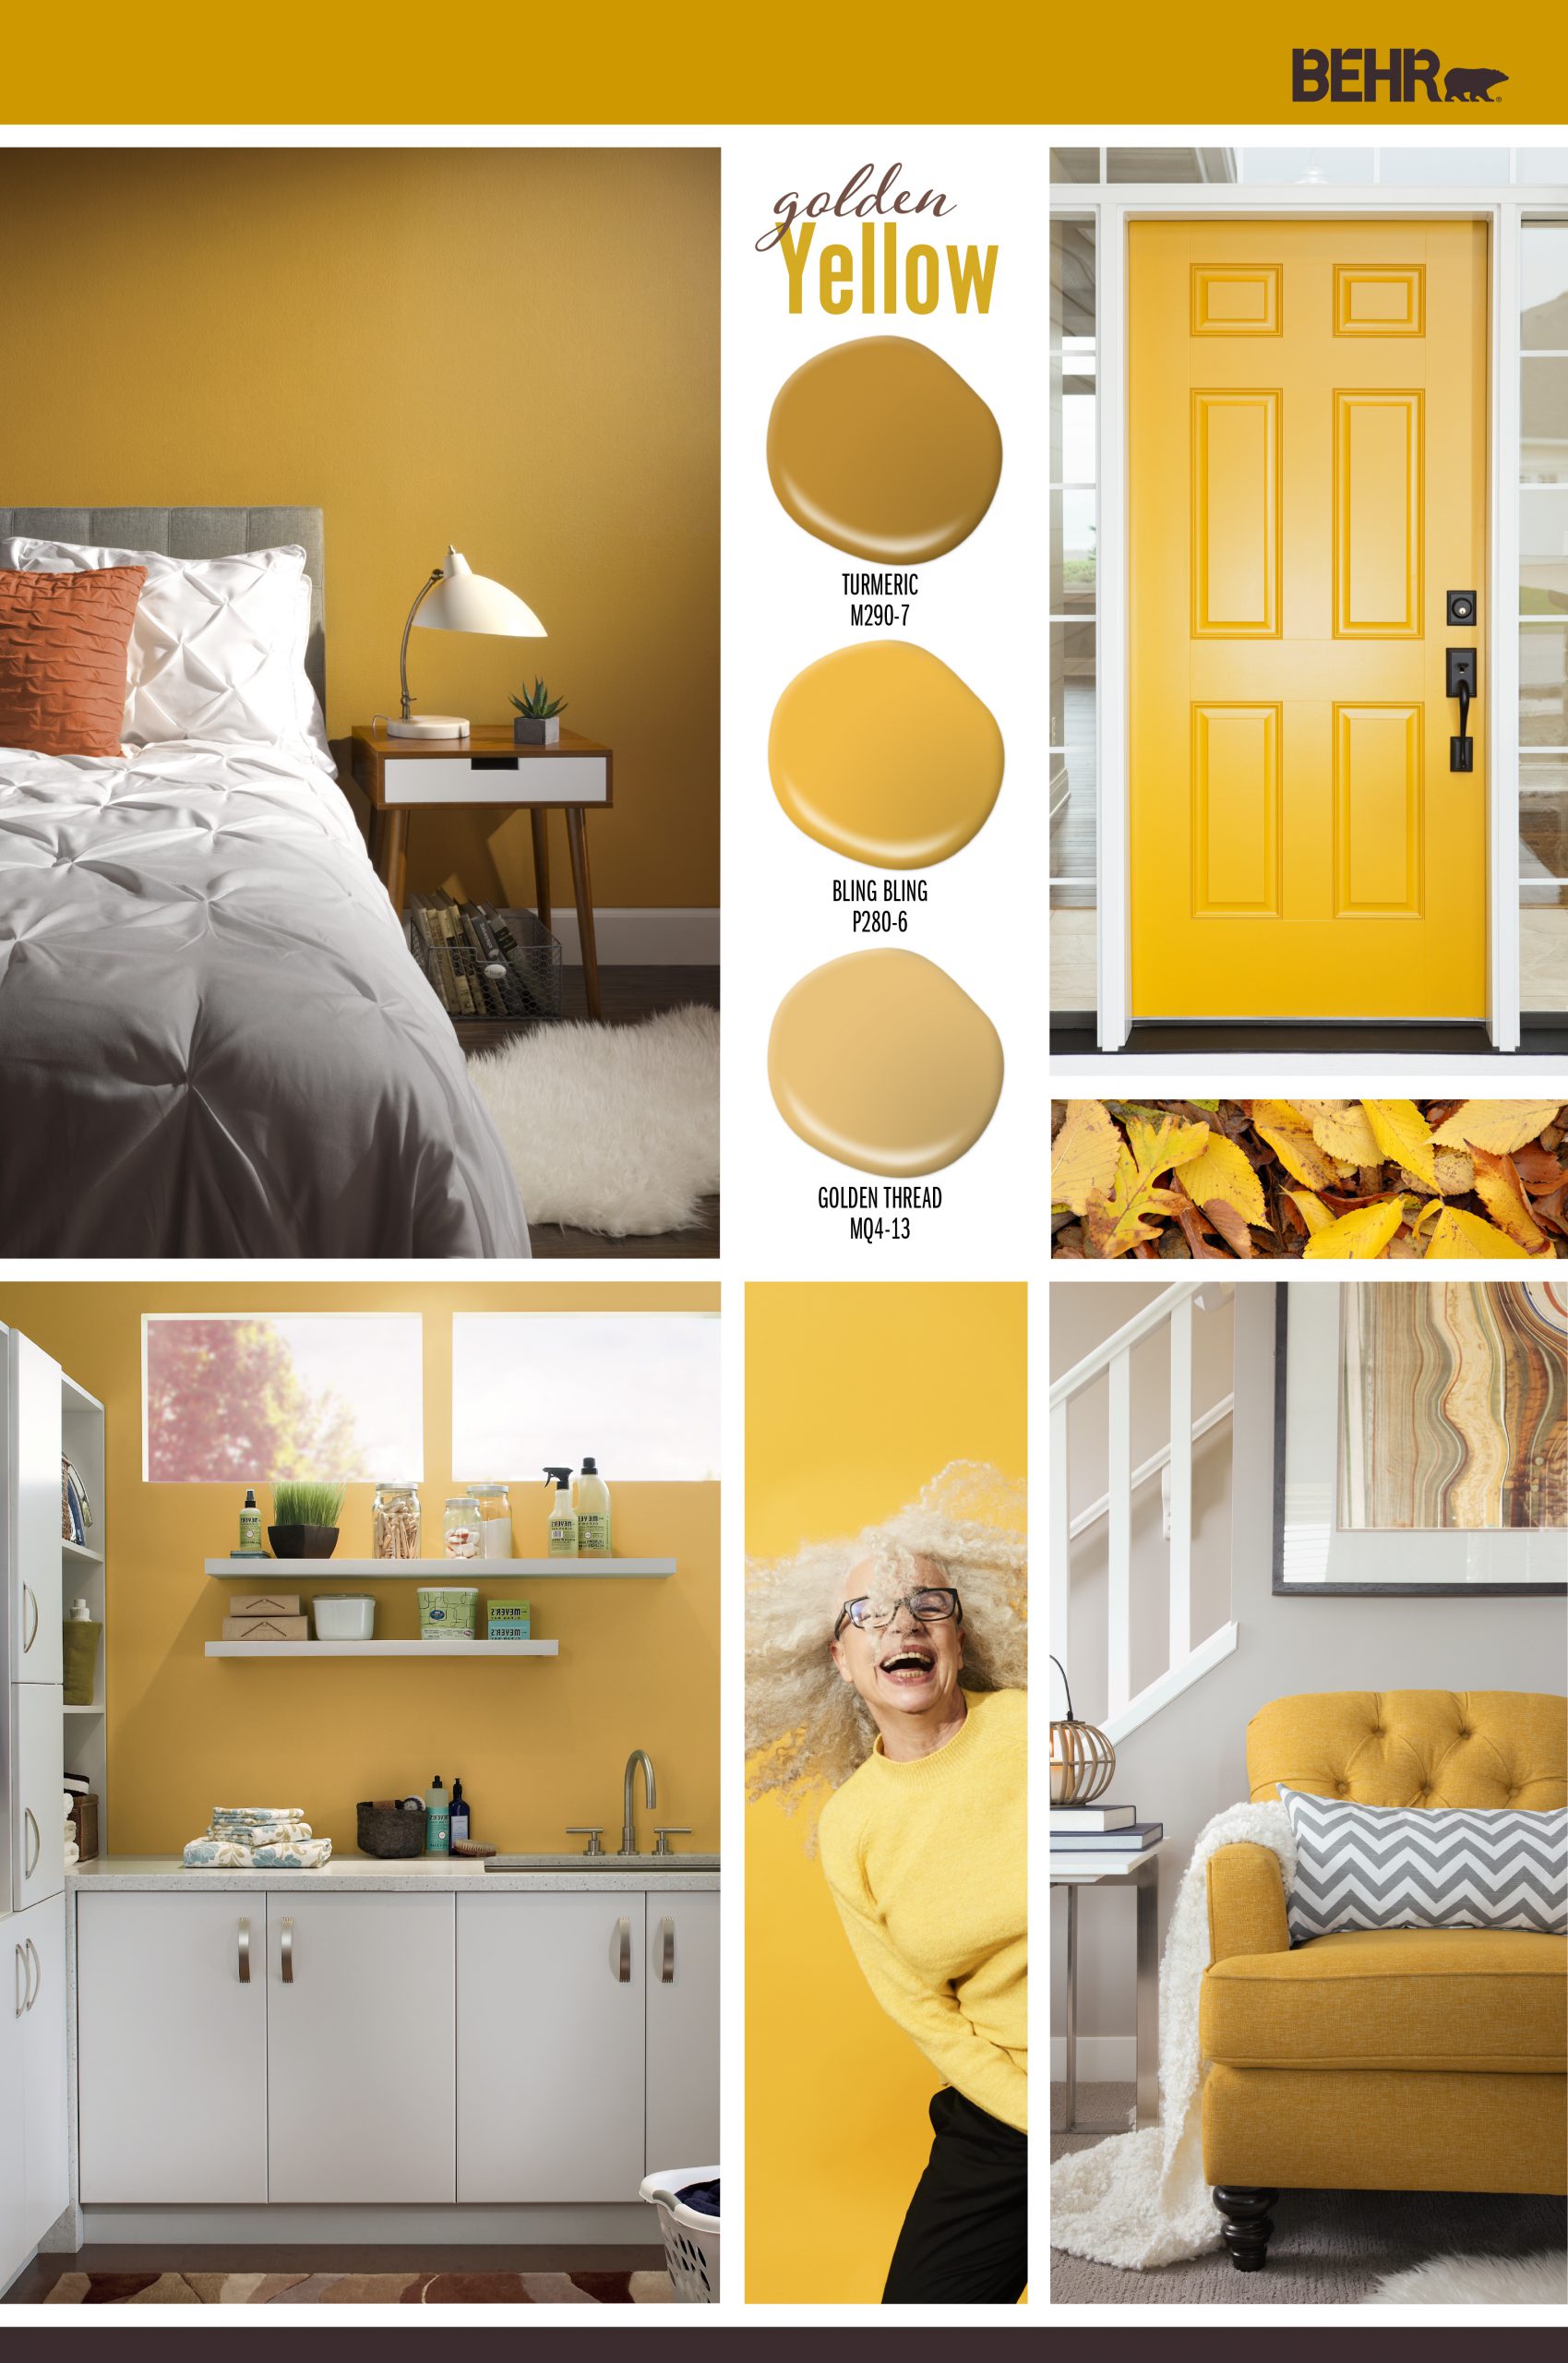 Inspiration board featuring three yellow paint drops: Turmeric, Bling Bling, Golden Thread. Images shown are the following: -A bedroom with walls painted in Turmeric. -A exterior door painted in Bling Bling. -A laundry room painted in Golden Thread. -An older woman dancing in front of a wall painted in Bling Bling. -A living room with a yellow chair.